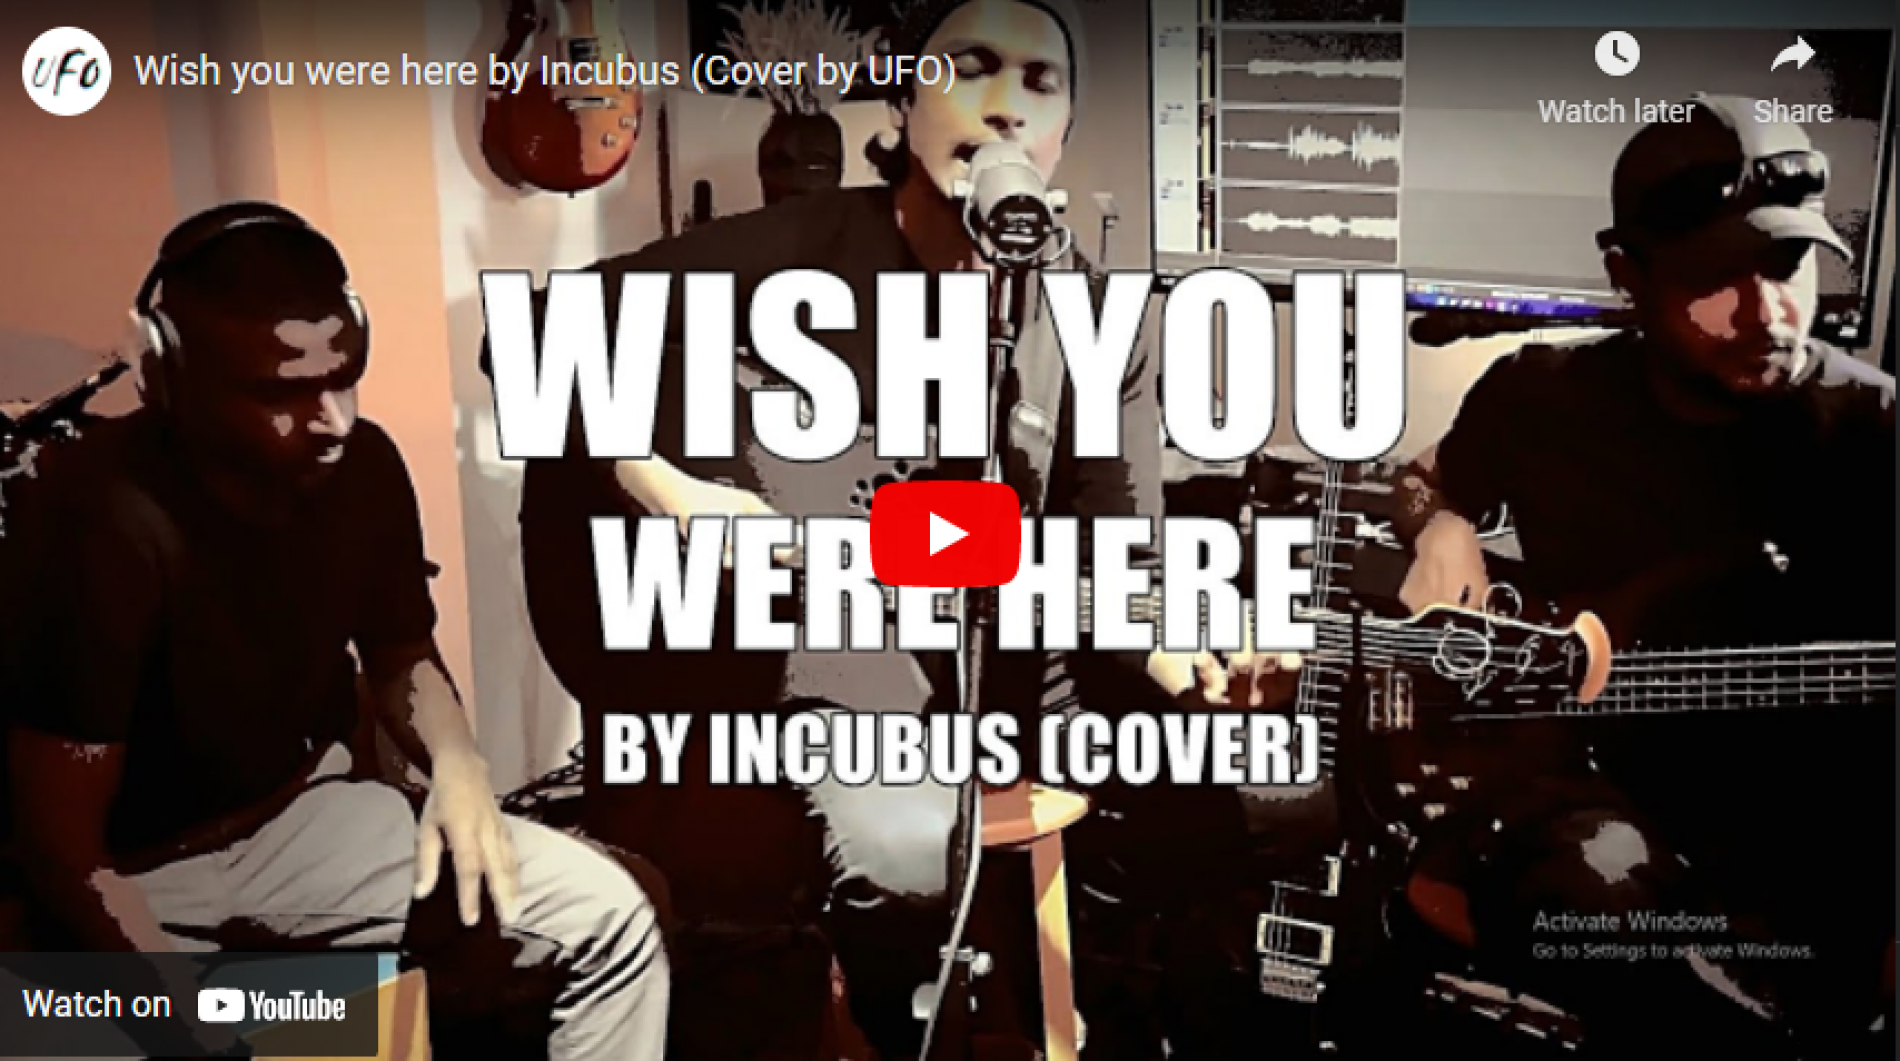 New Music : Wish You Were Here By Incubus (Cover By UFO)